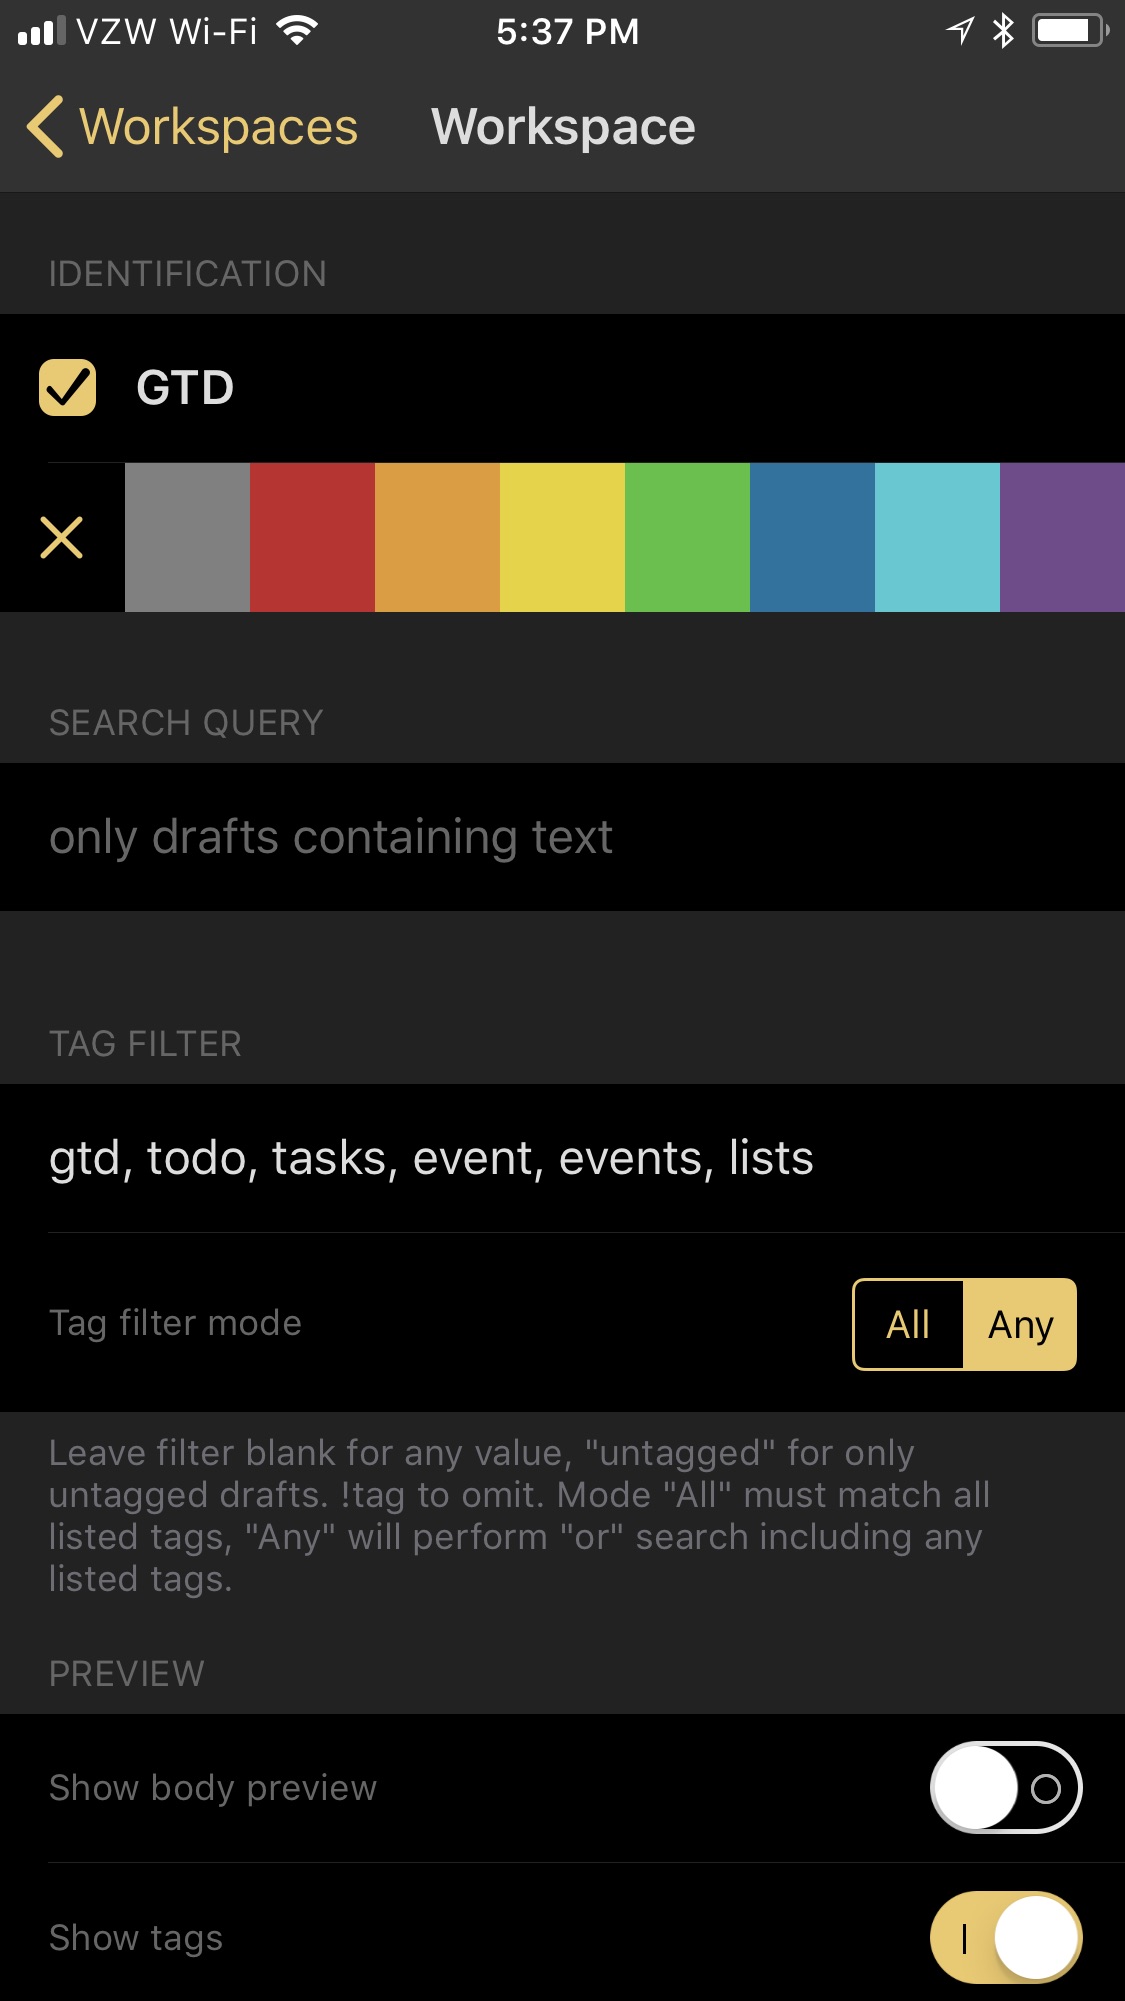 Tag filtering has been improved